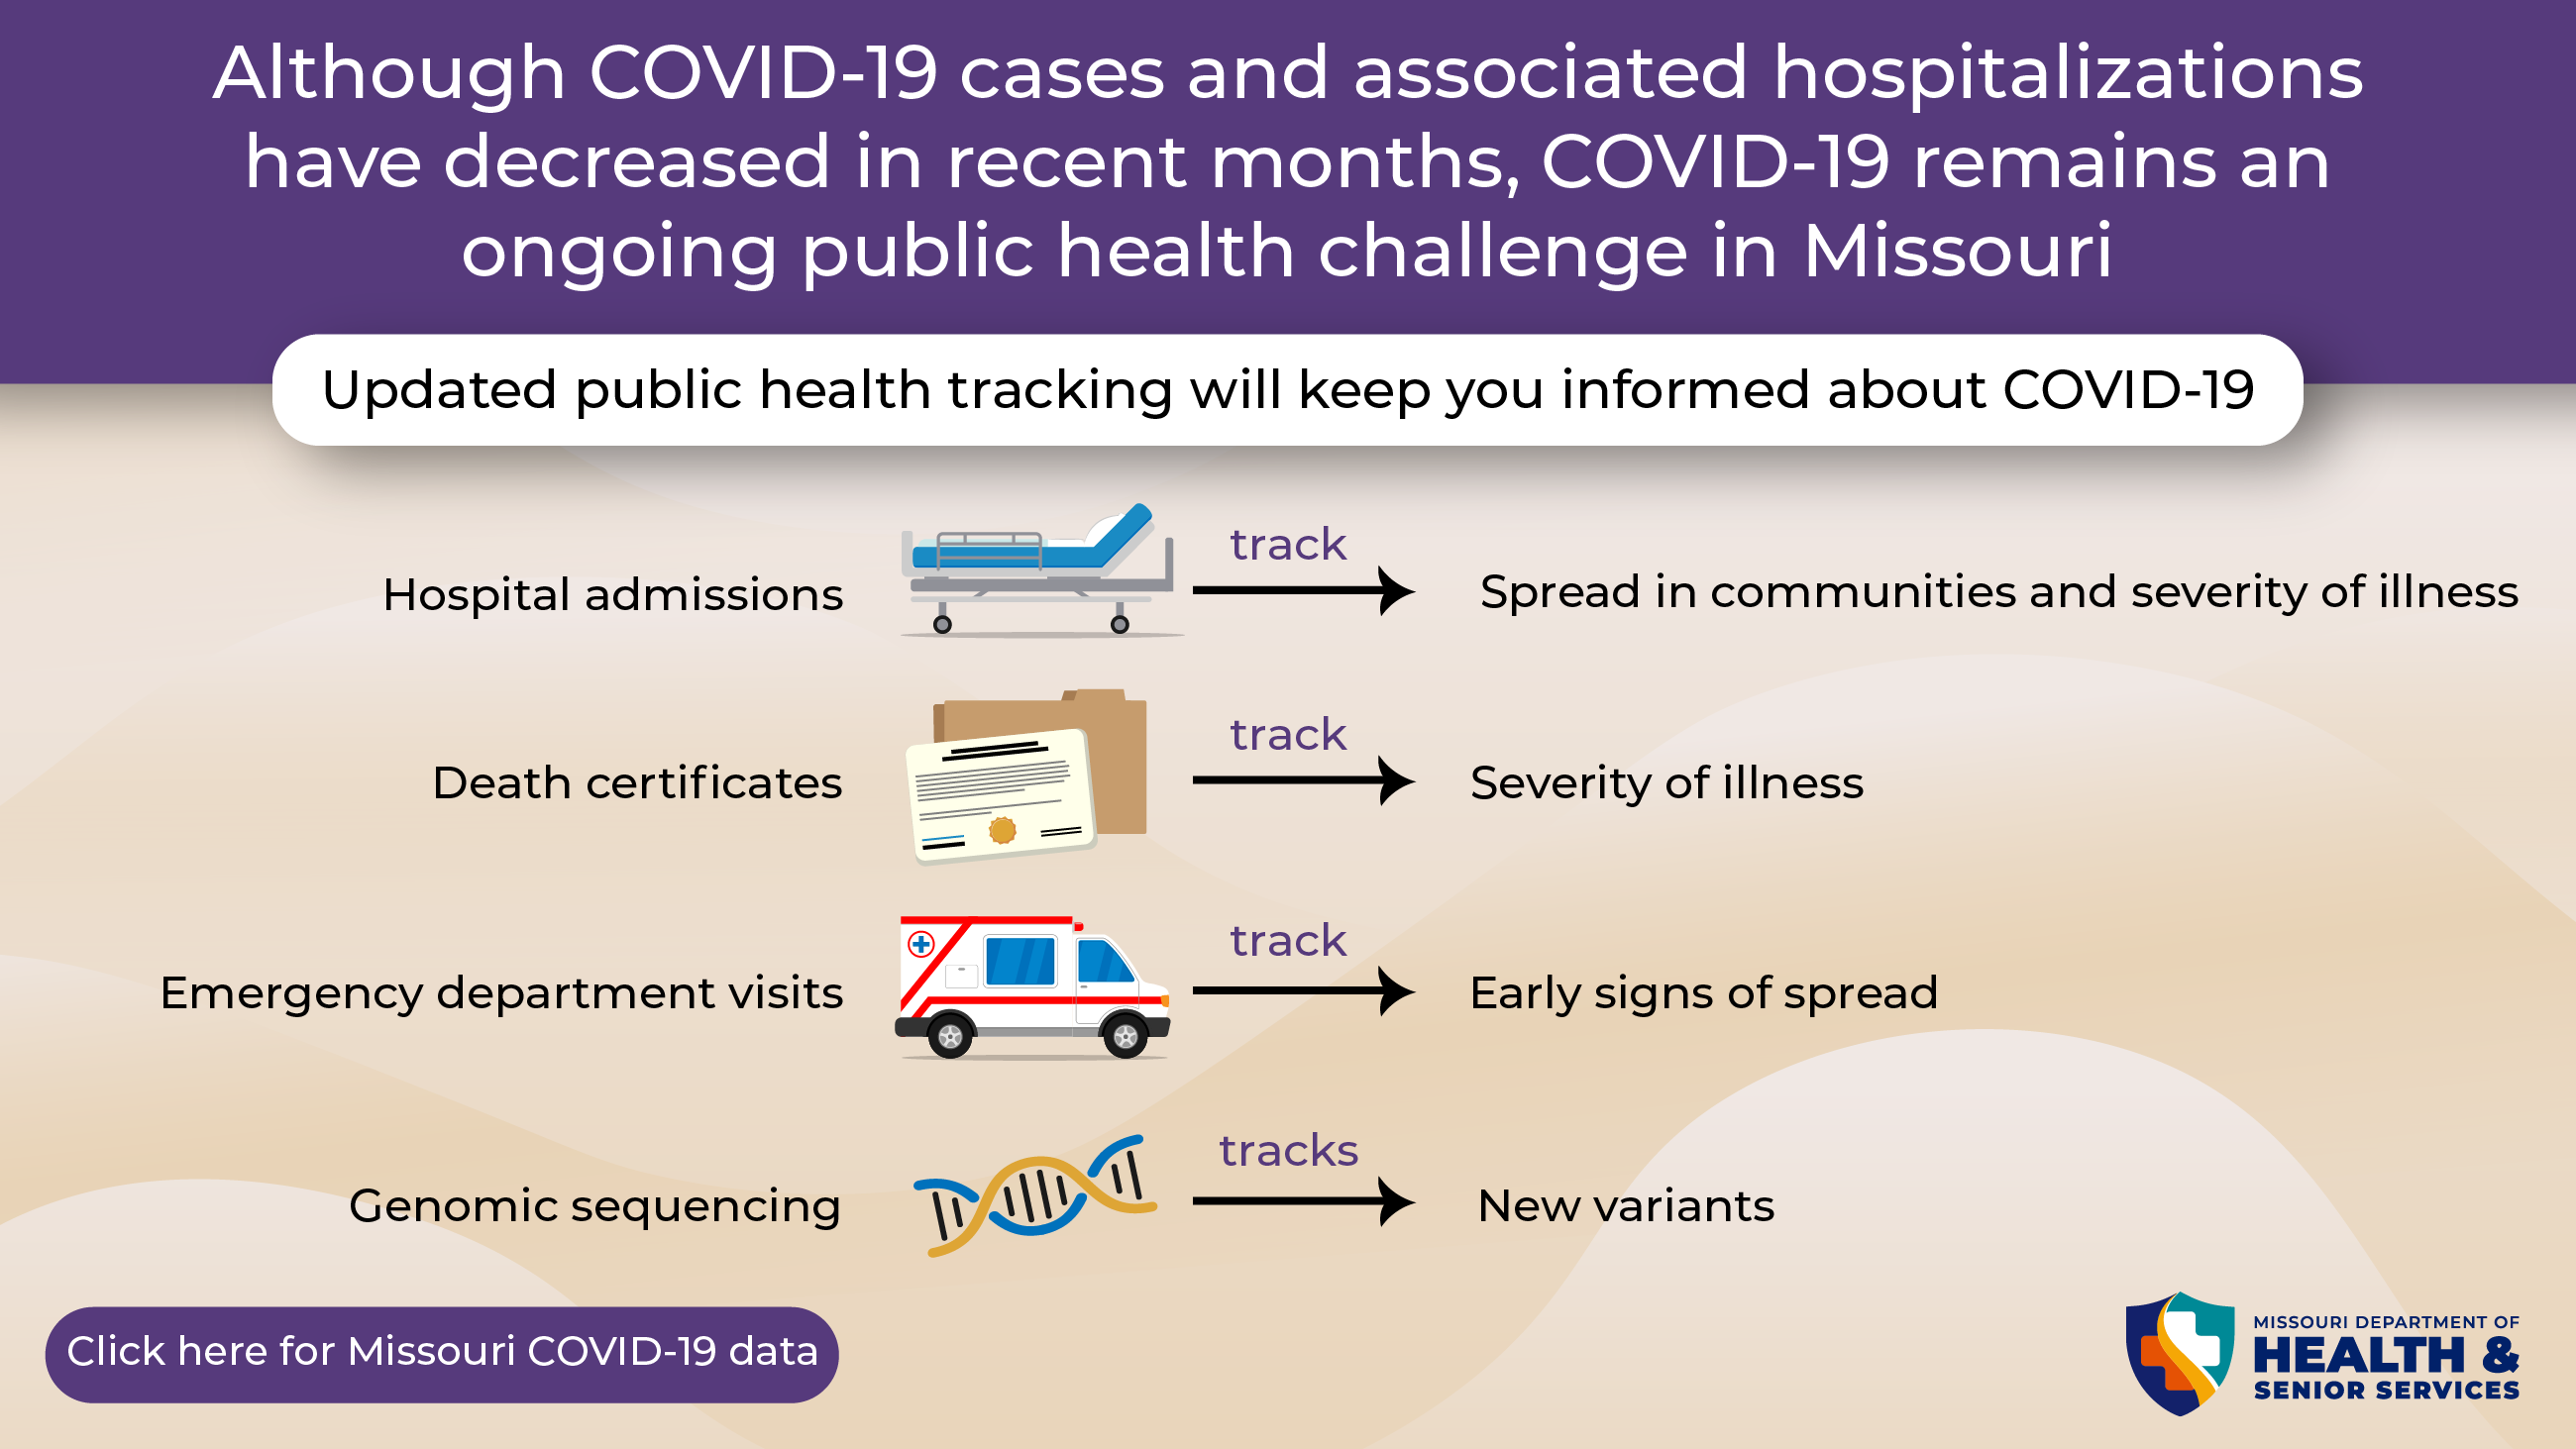 covid-19 remains an ongoing public health challenge